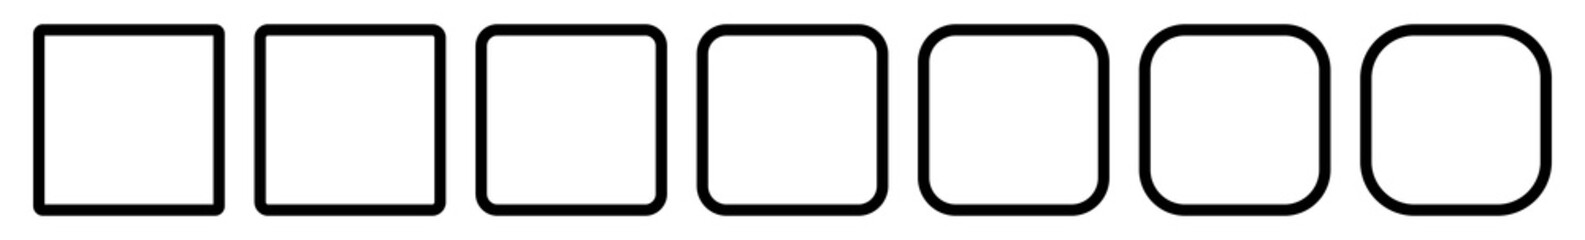 Square Icon Black | Round Squares | Foursquare Symbol | Frame Logo | Button Sign | Isolated | Variations